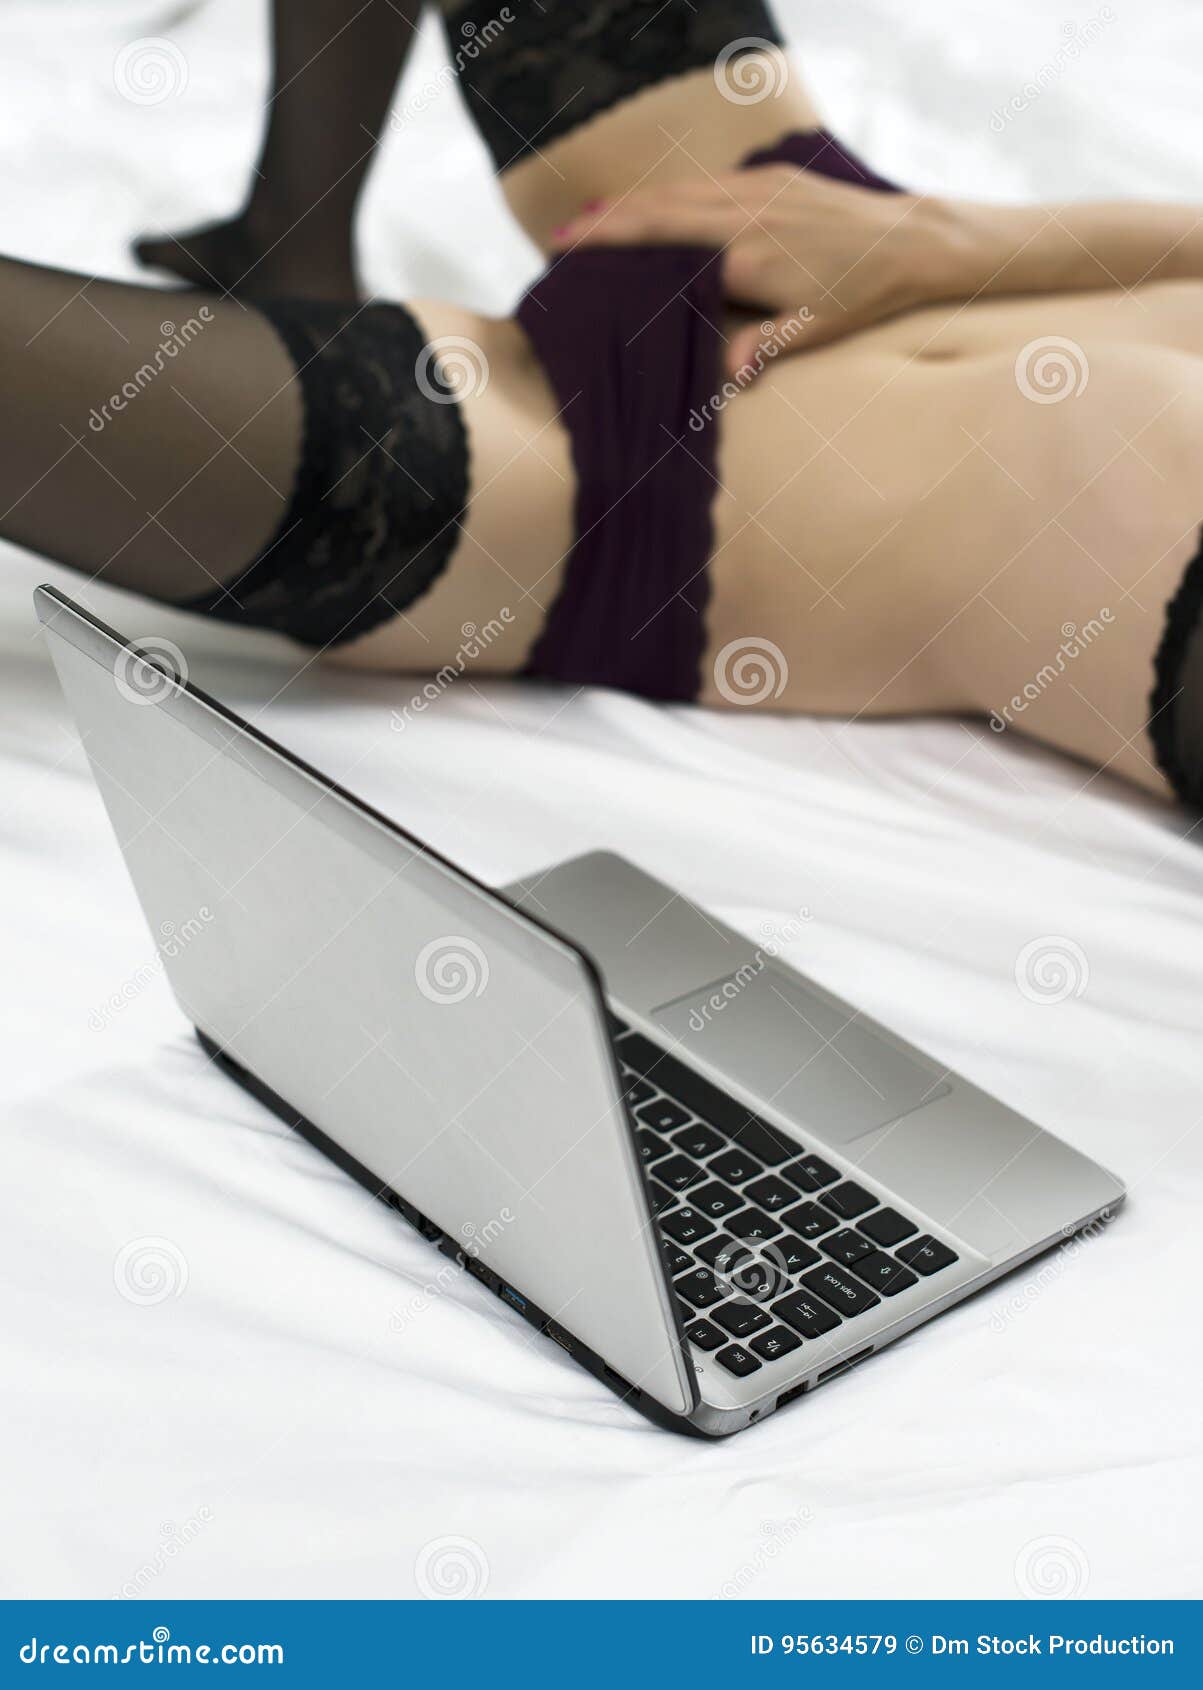 Virtual Sex Stock Image Image Of Notebook Lingerie